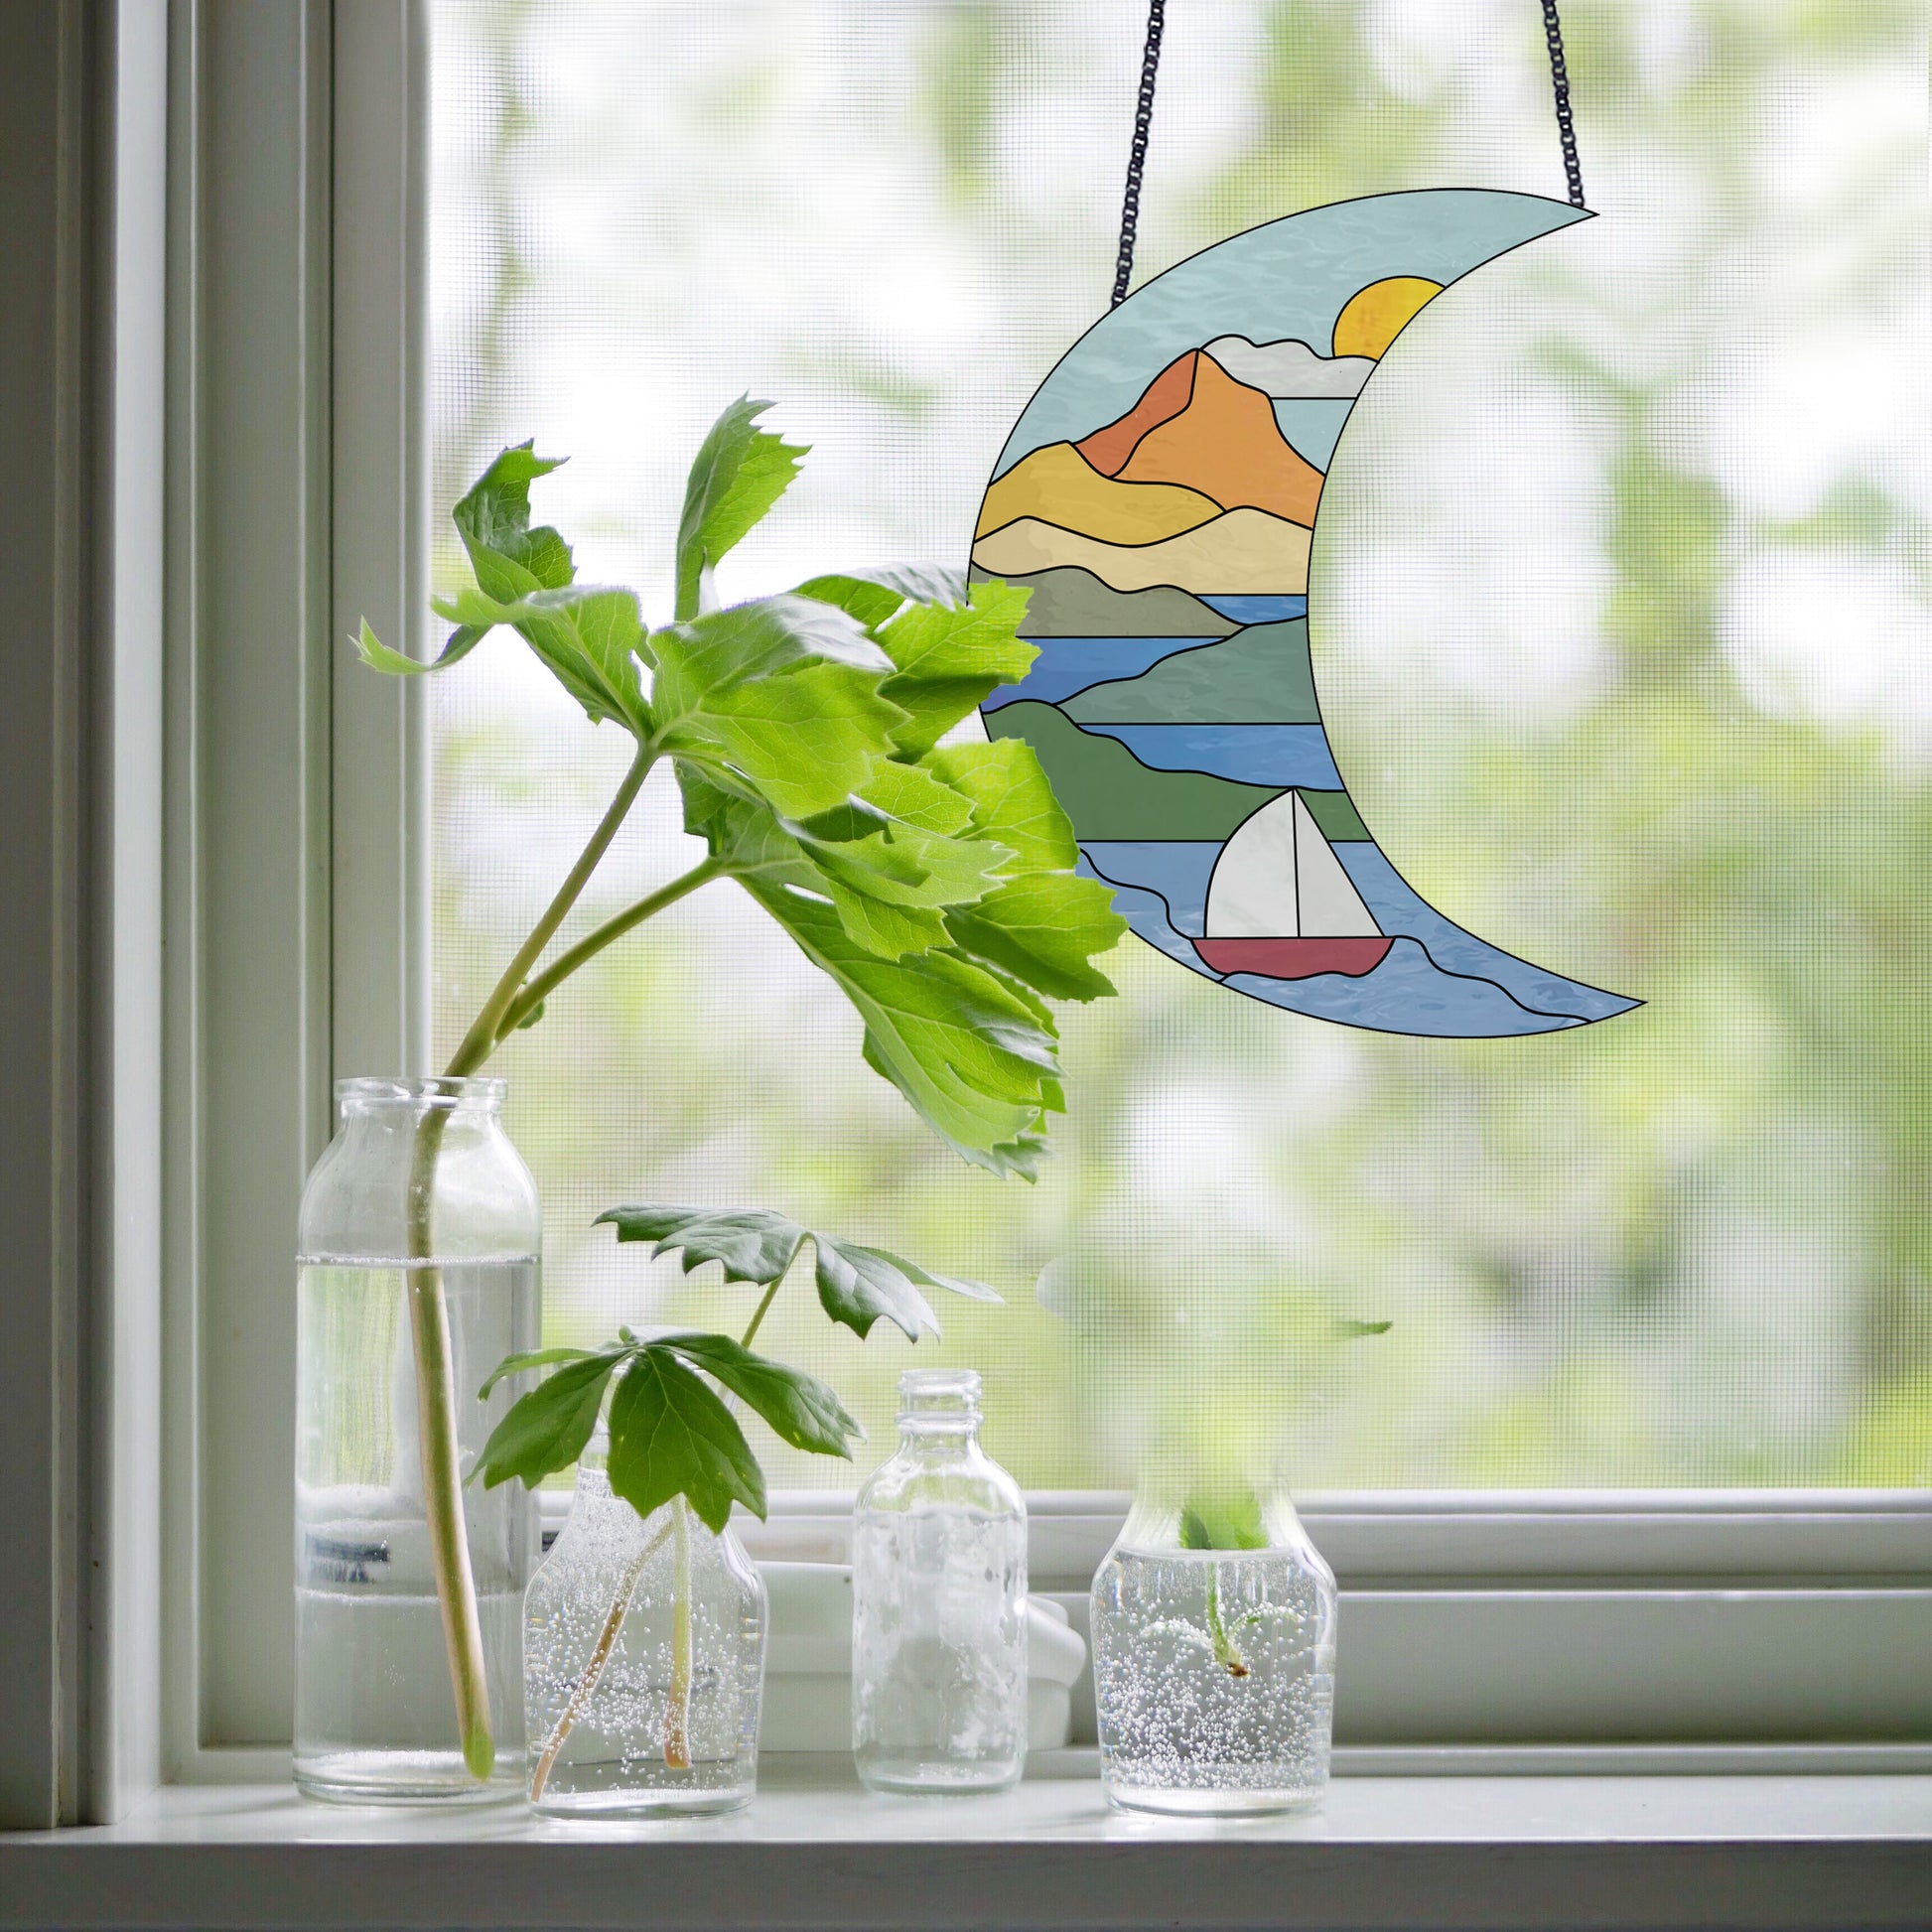 Stained glass pattern for a boho seascape crescent moon, instant PDF download, shown in a window with plants